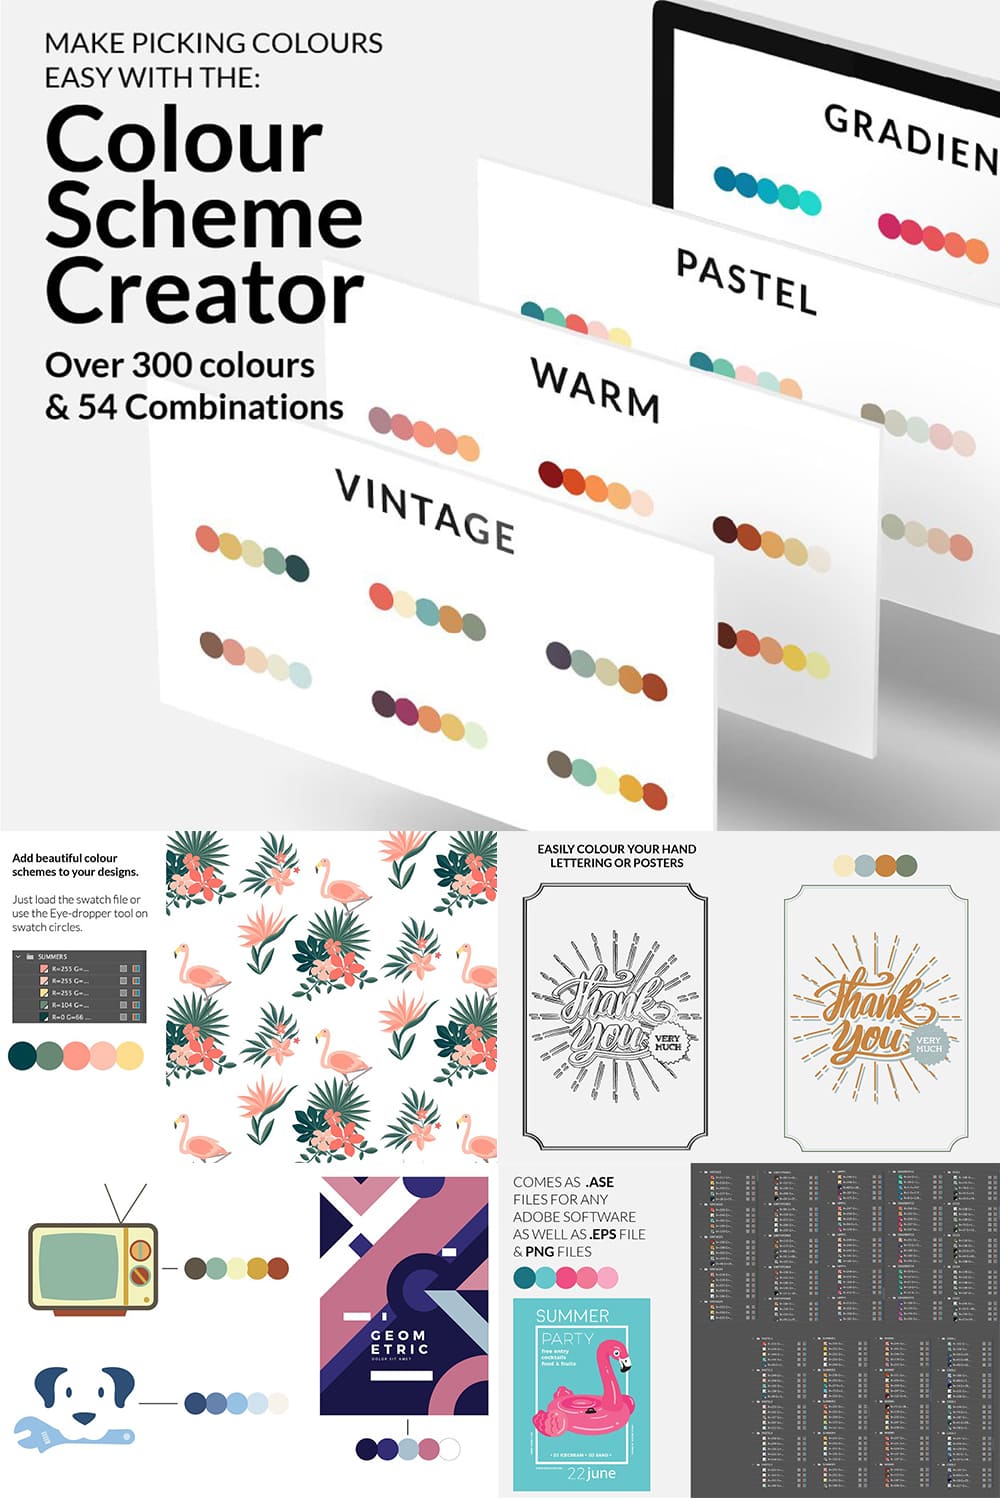 Make Picking Colours Easy With The Colour Scheme Creator!